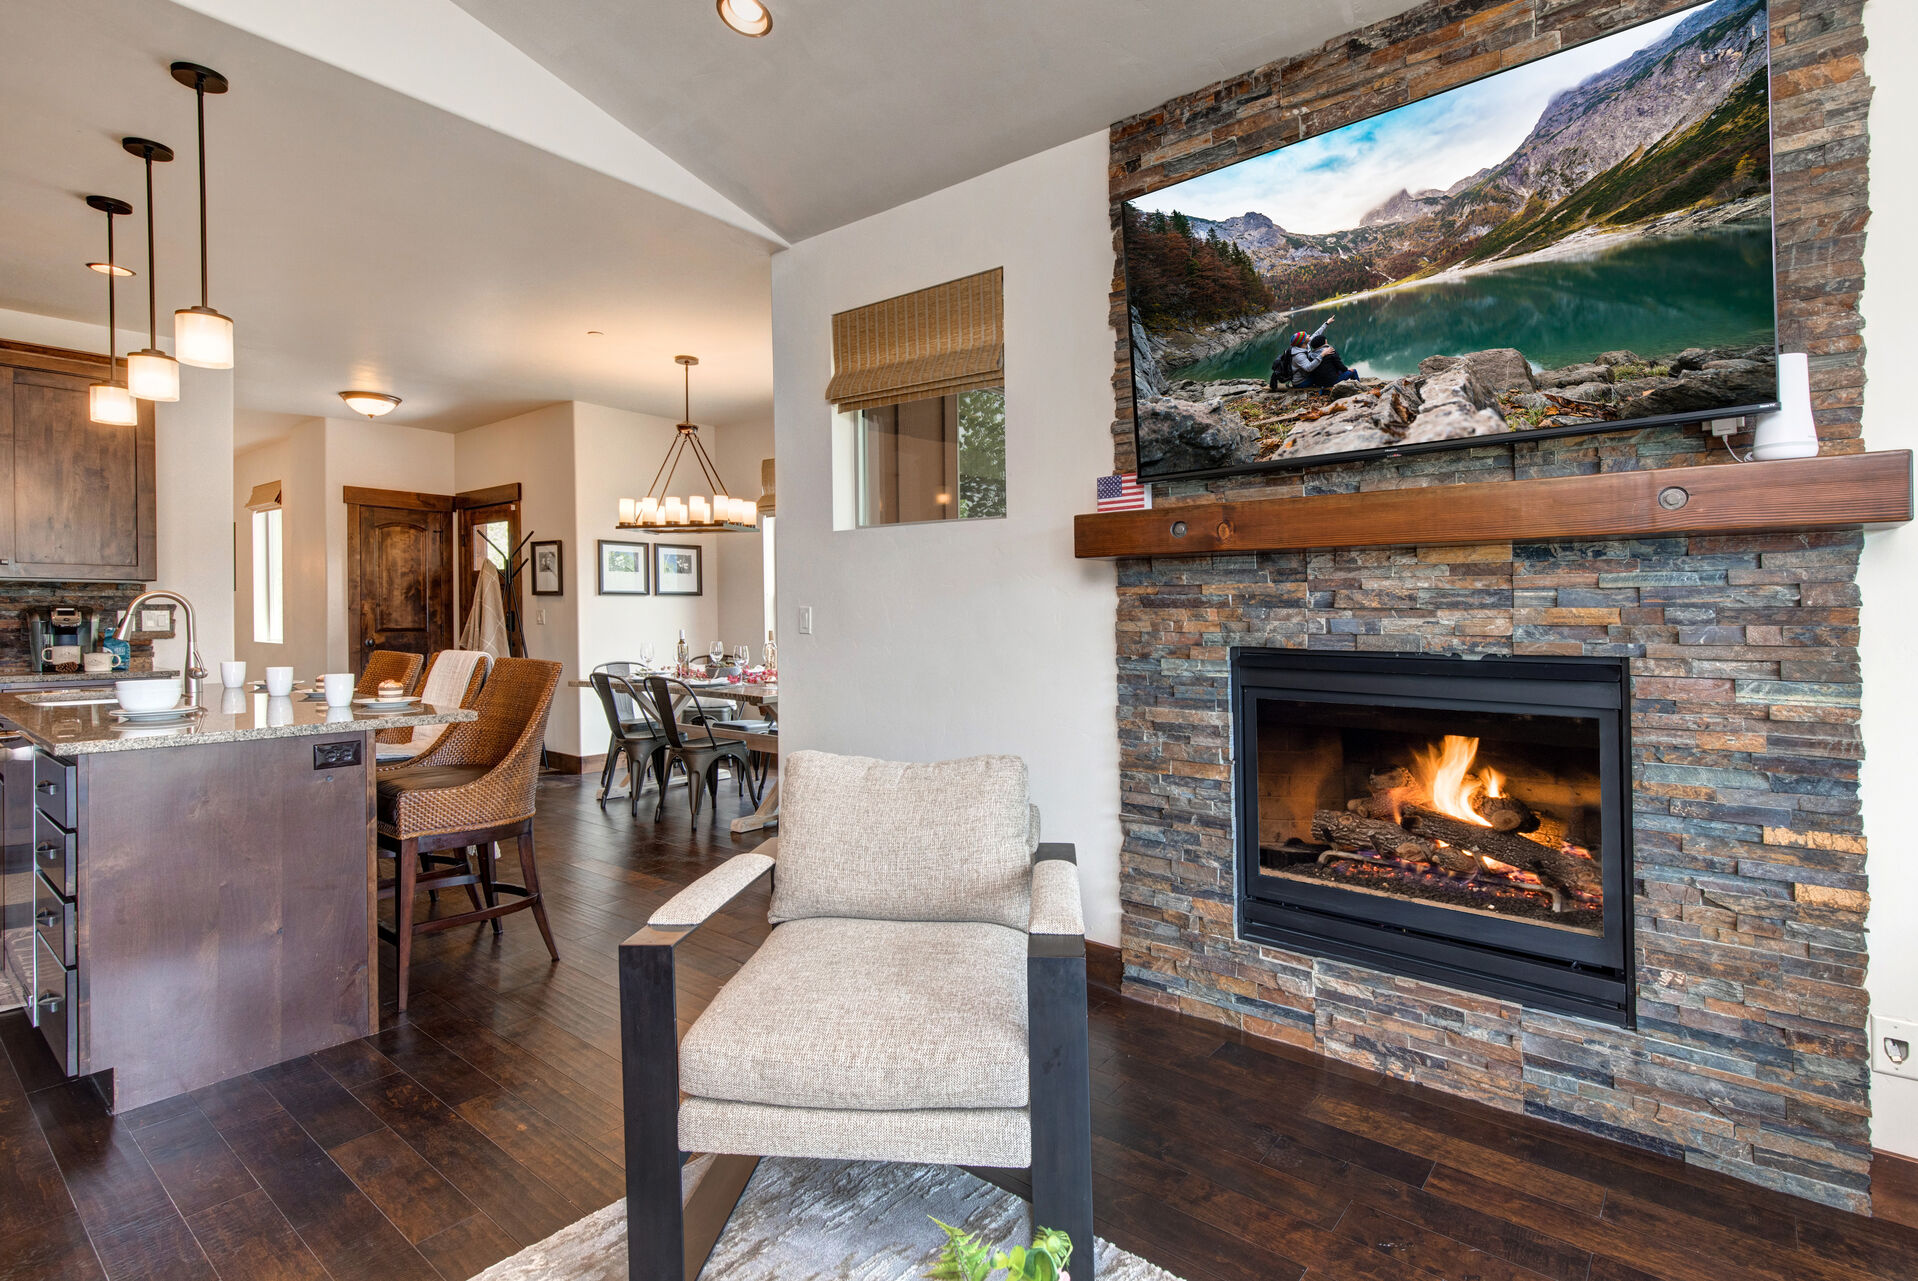 Main Level Living Room with plush sectional, smart tv, gas fireplace, and access to private deck overlooking the surrounding mountain resorts